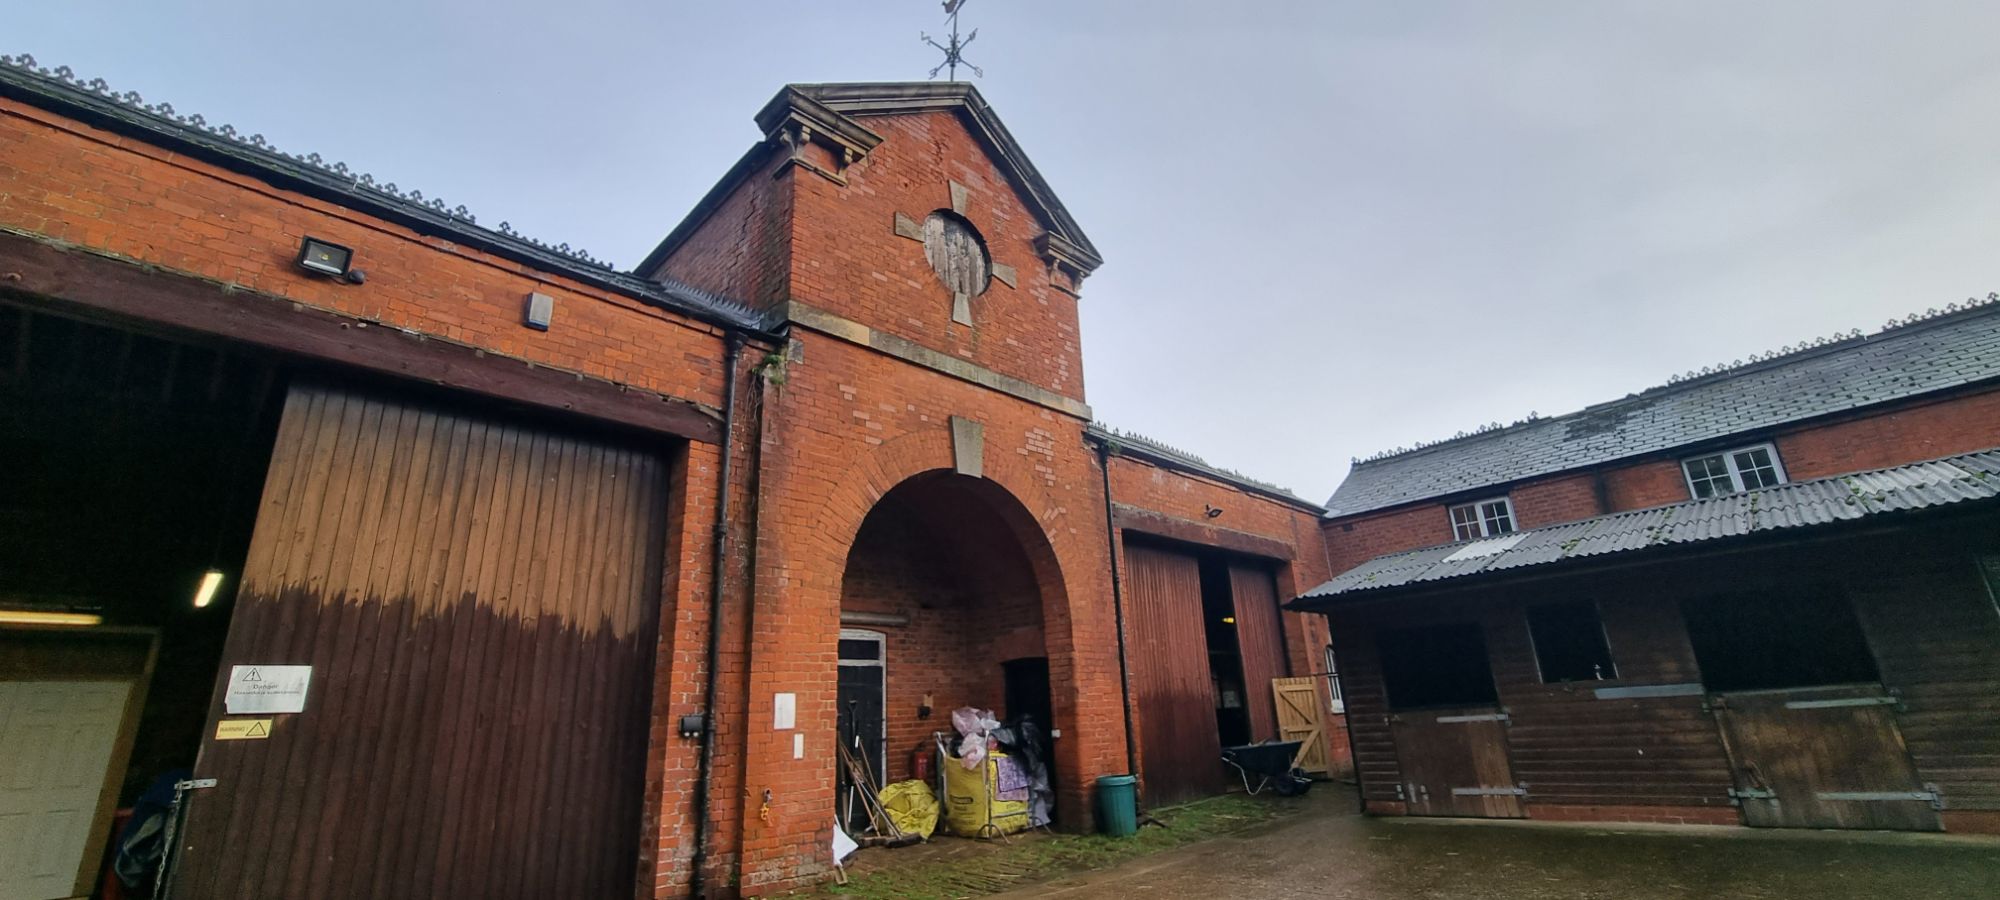 Barn Conversions and Heritage Agricultural Buildings - Specialists in support for all forms of change of use planning applications